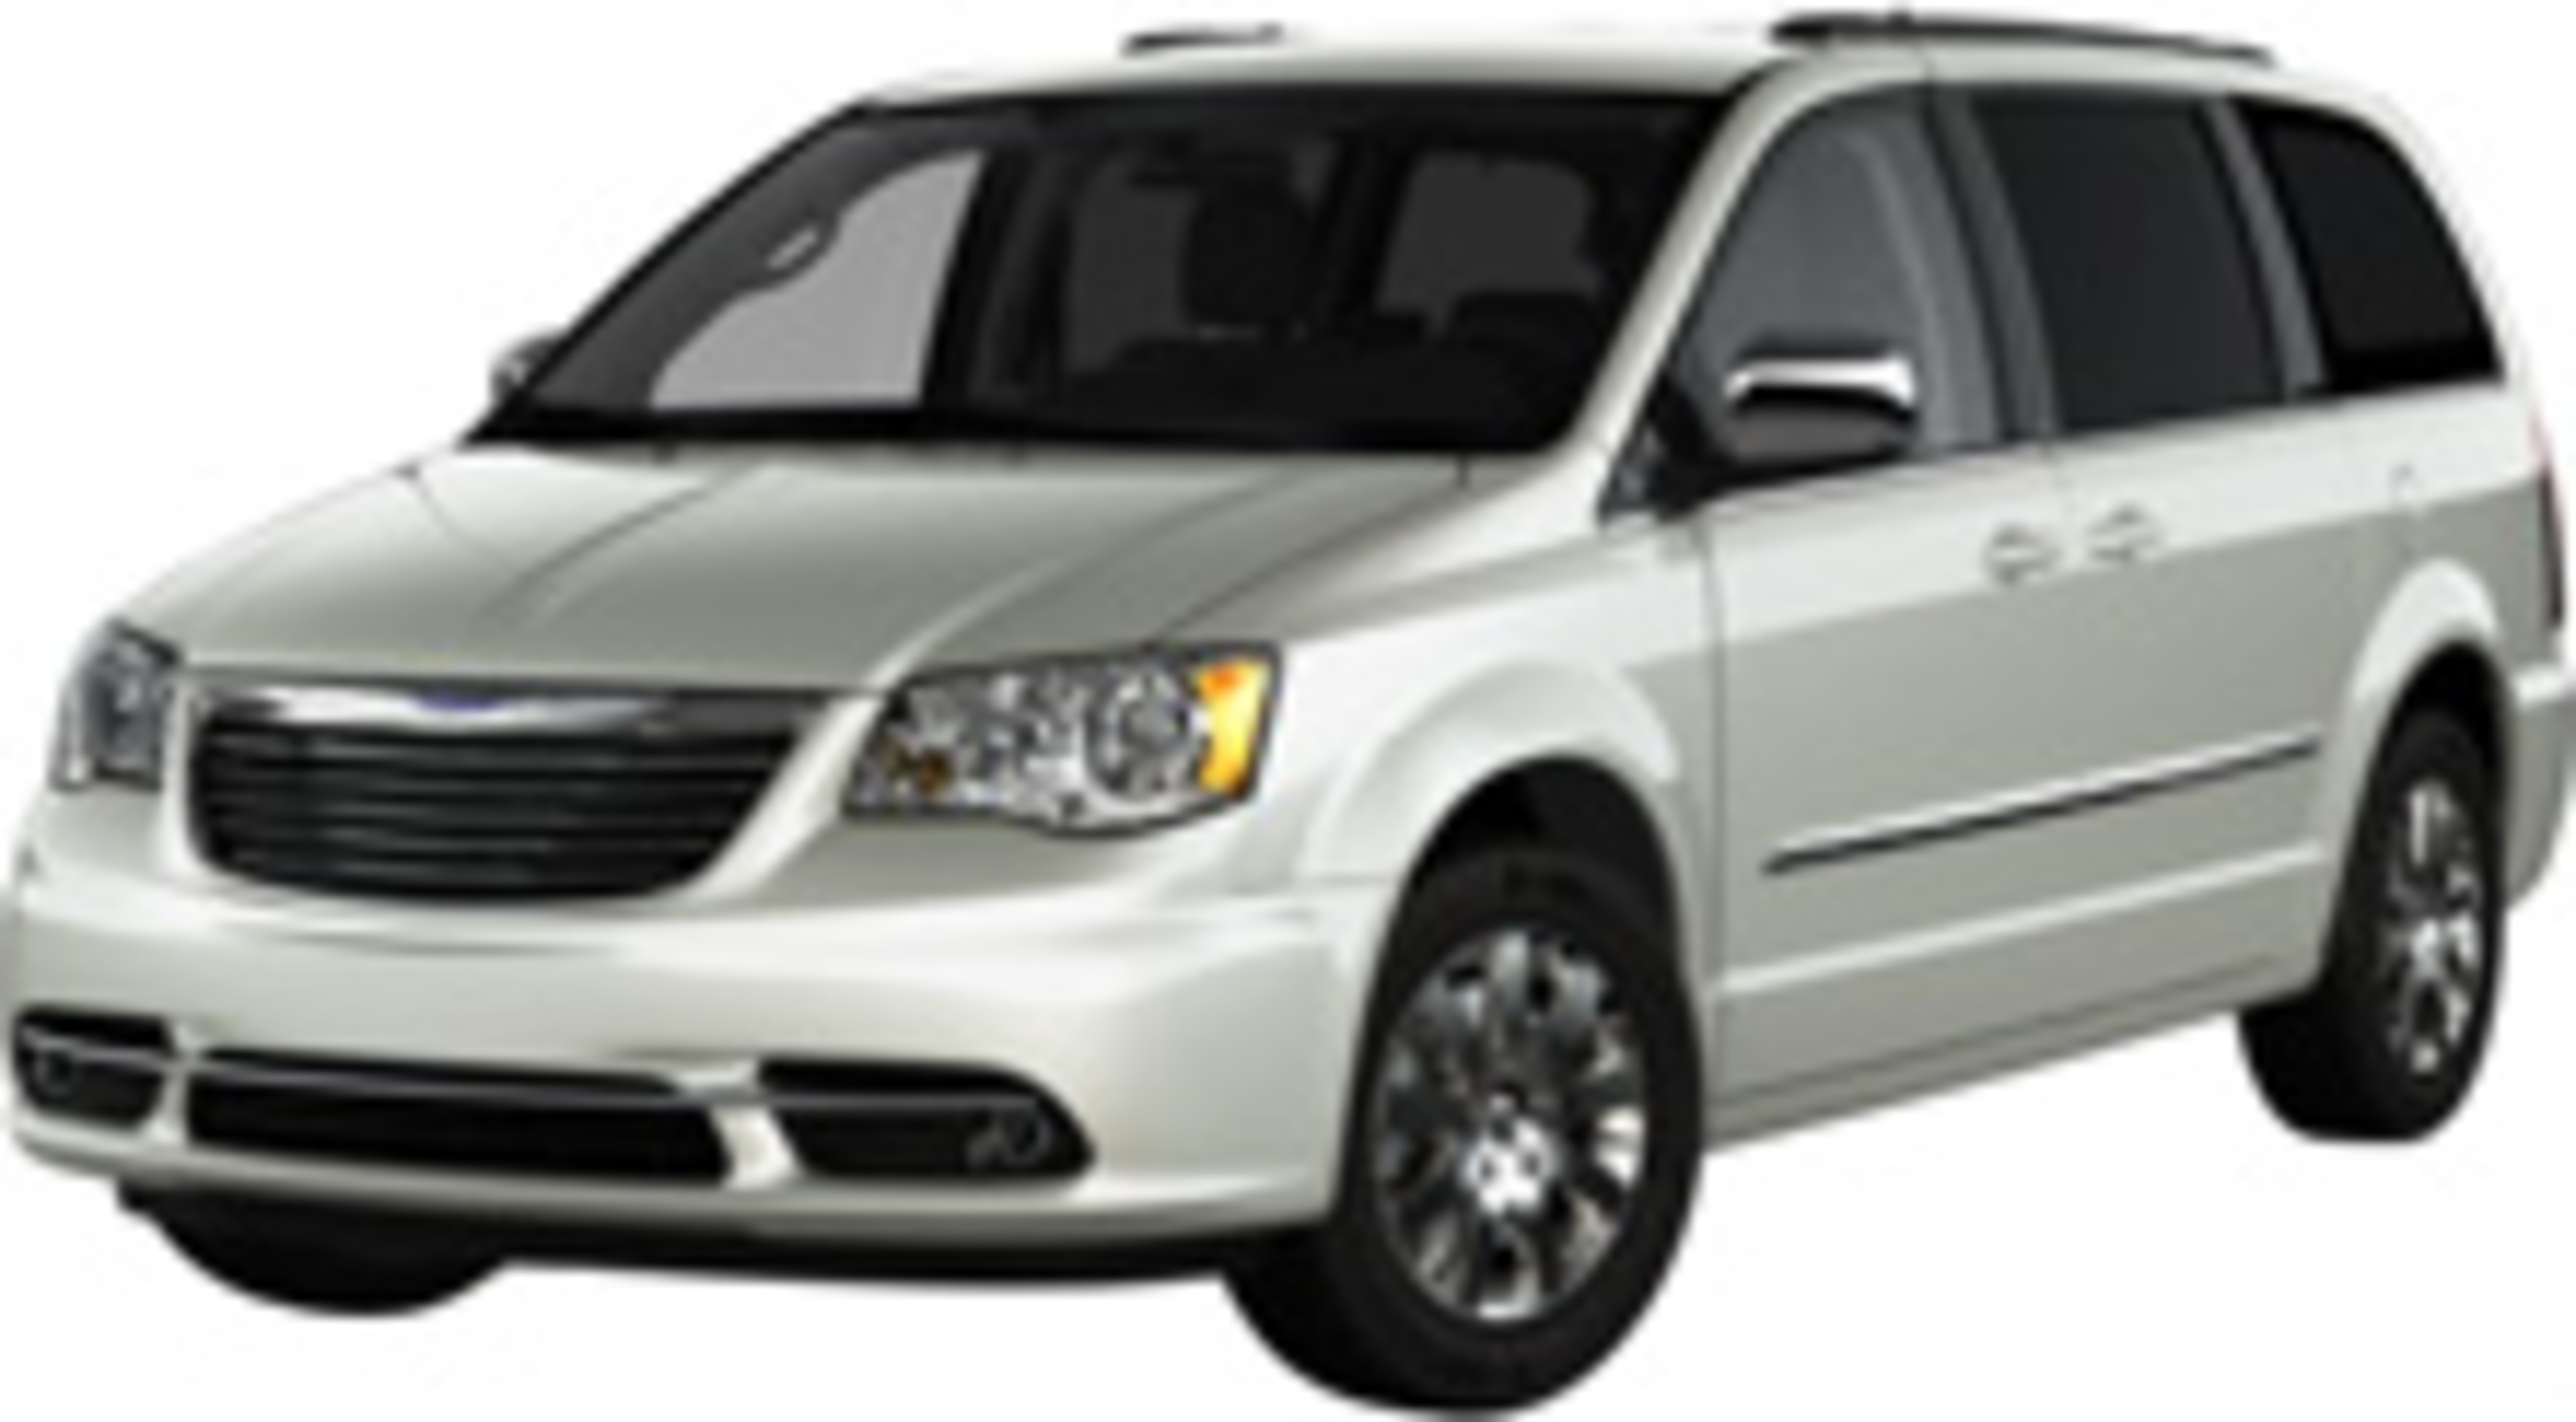 2012 Chrysler Town & Country Service and Repair Manual